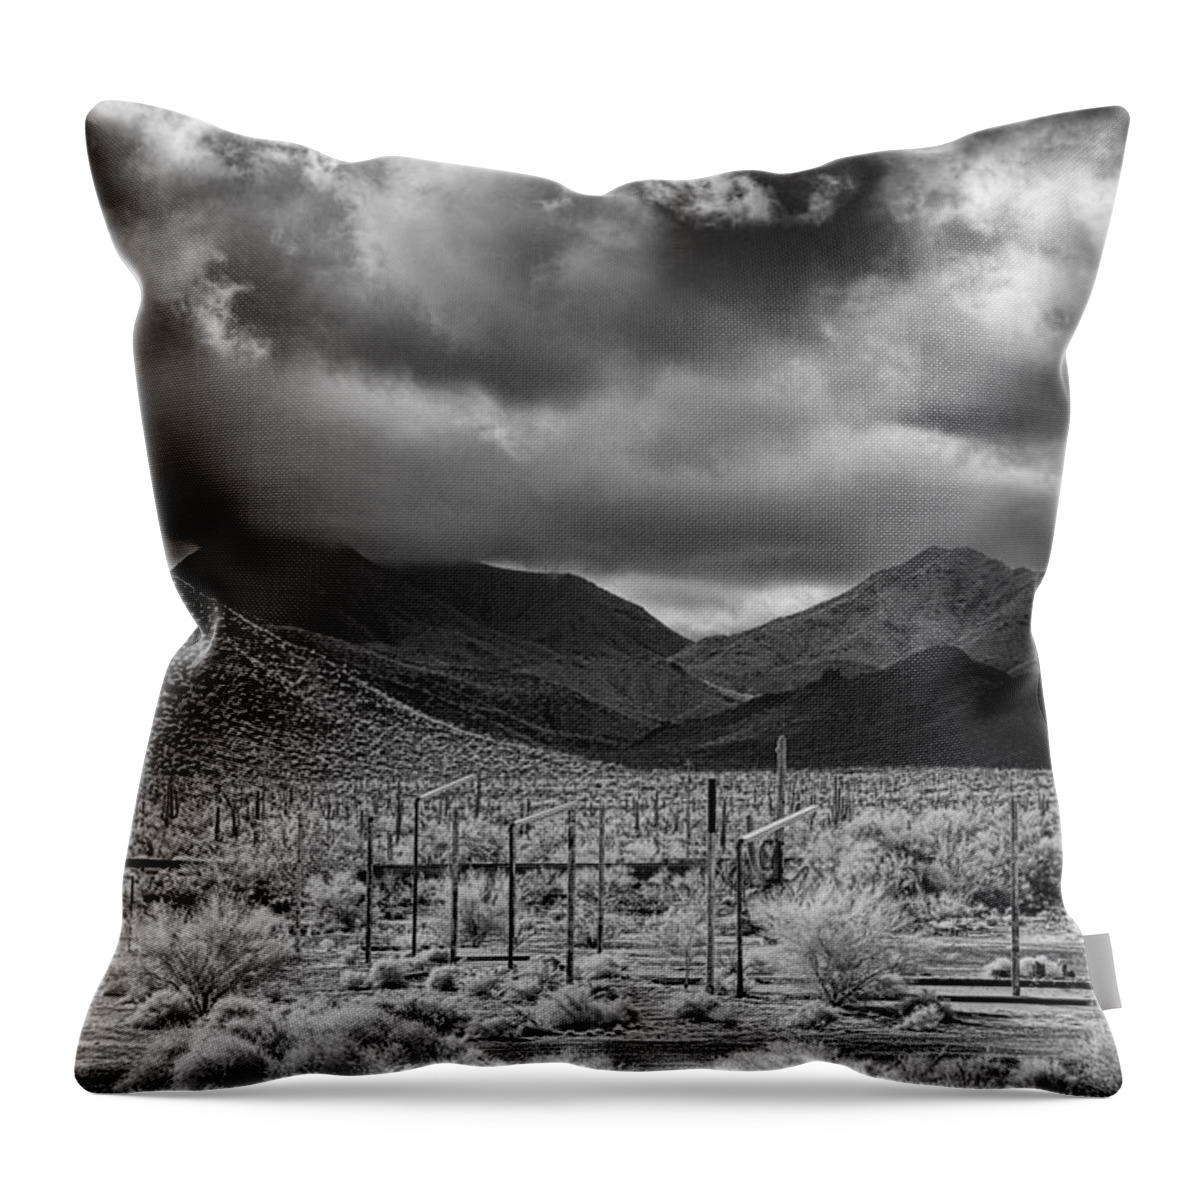 Papago Throw Pillow featuring the photograph Papago Reservation by Hugh Smith